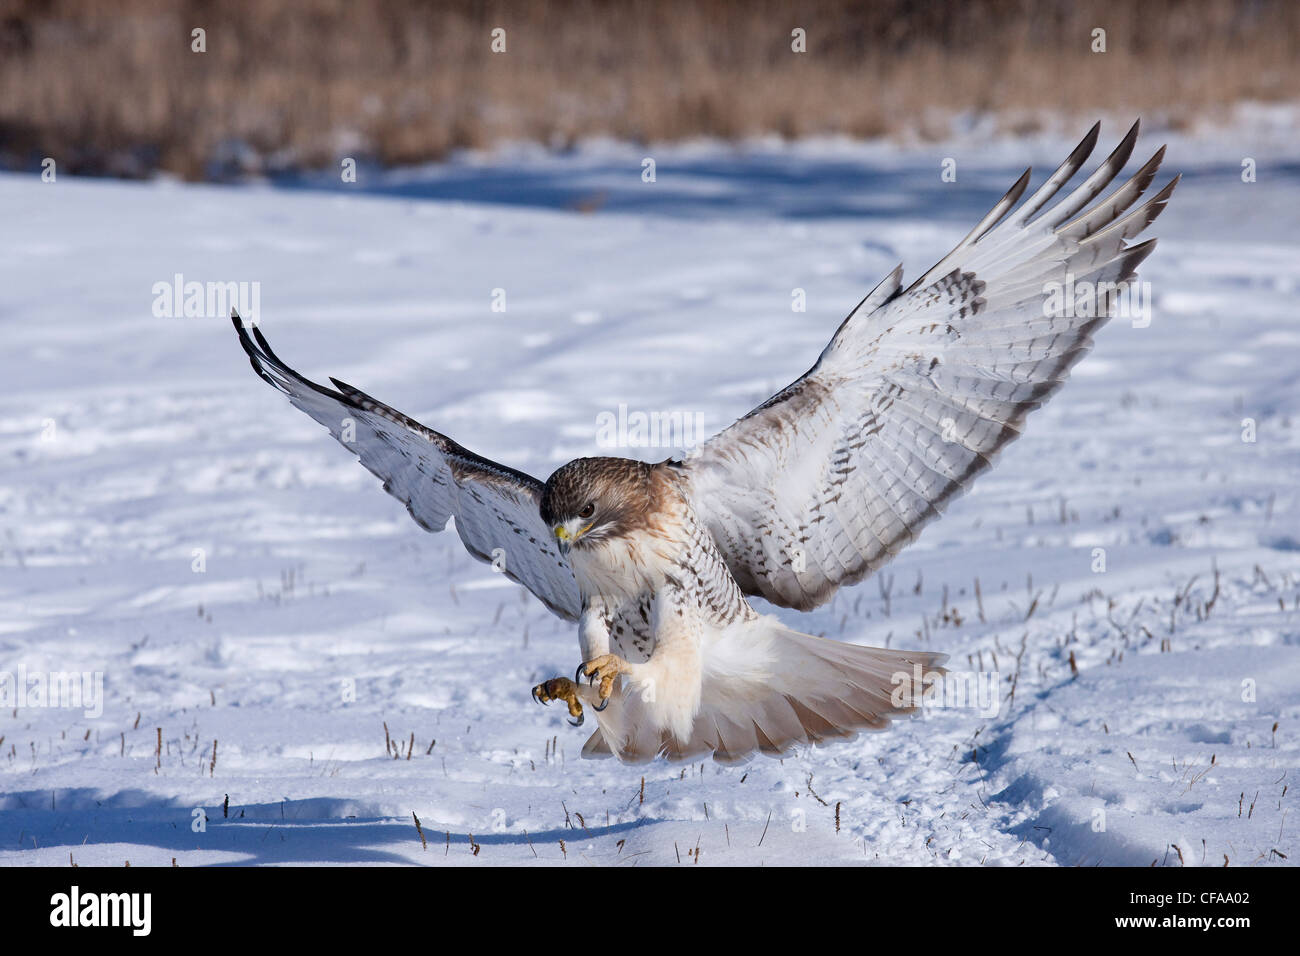 A Red-tailed Hawk (Buteo jamaicensis) flies in with talons ready to catch its prey in the snow Stock Photo